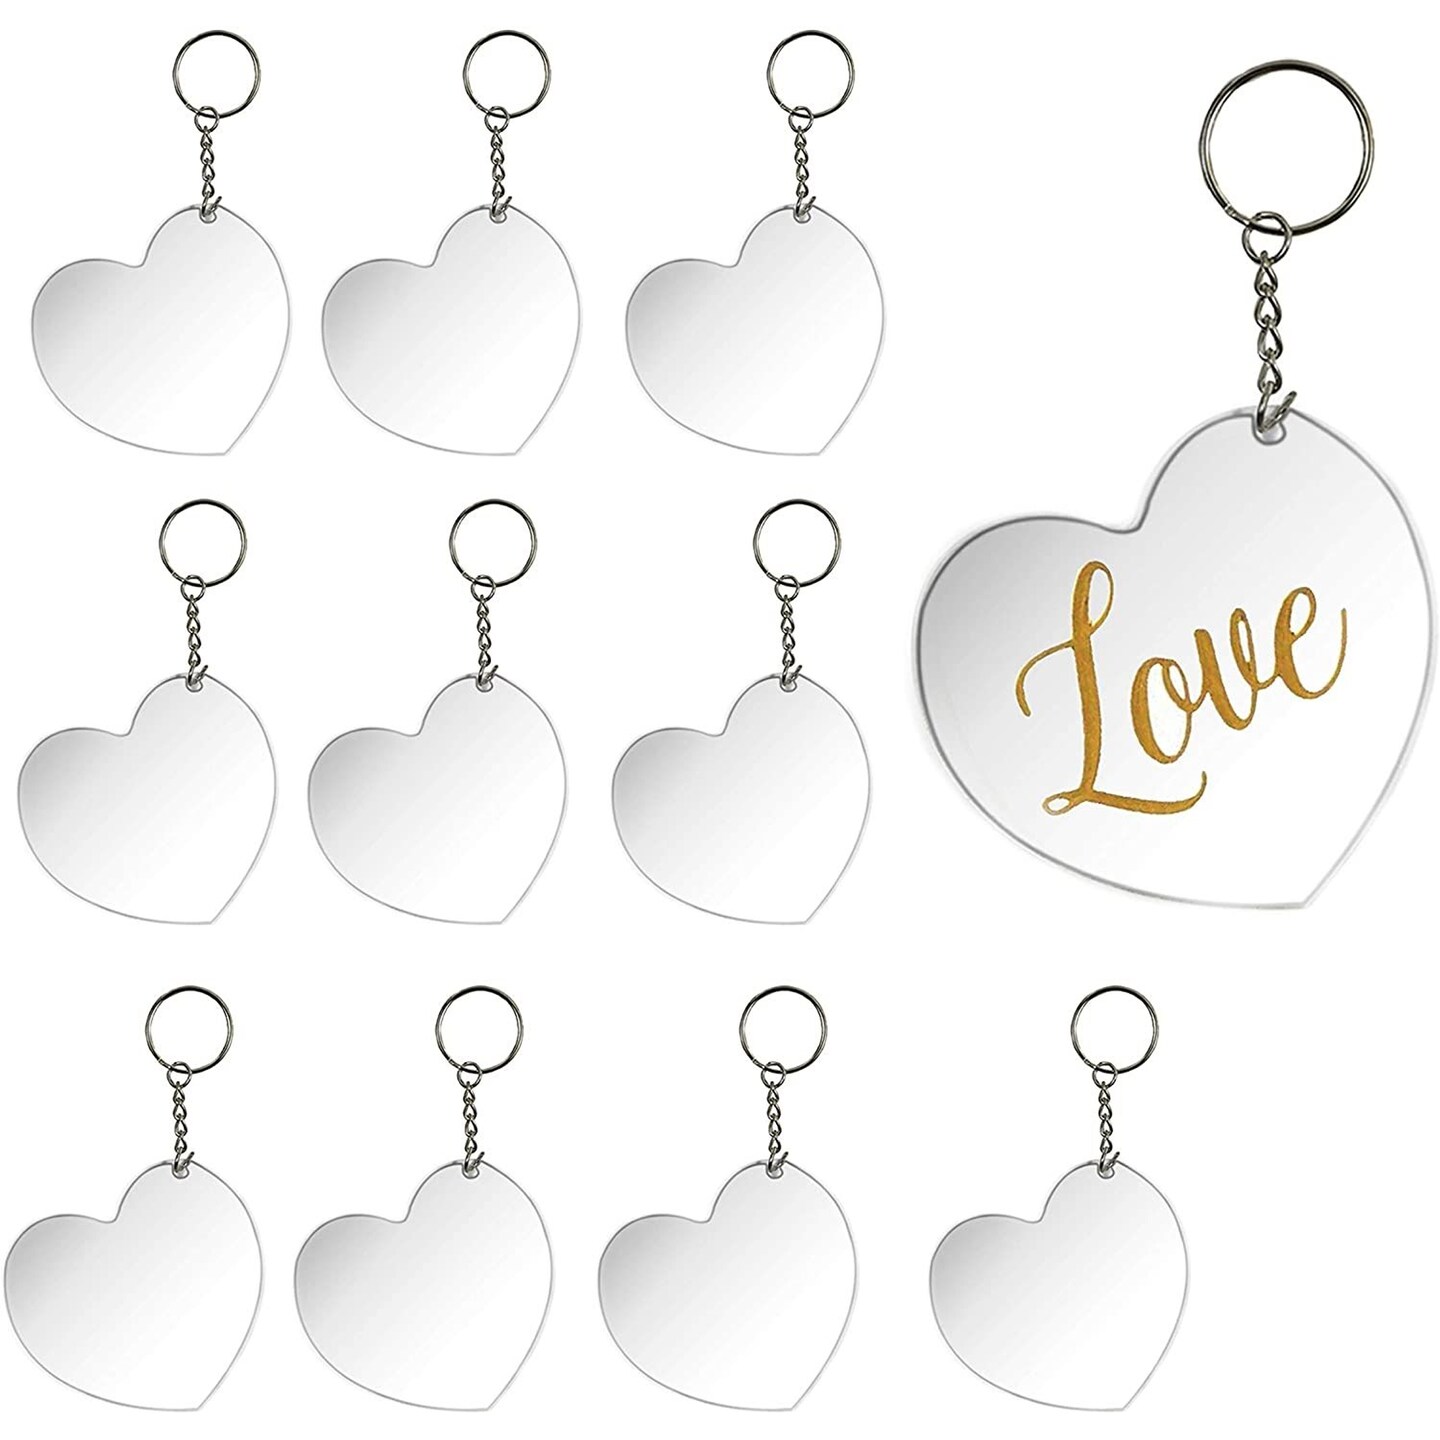 Acrylic Heart Keychain Blanks with Metal Rings for DIY Crafts (3x2